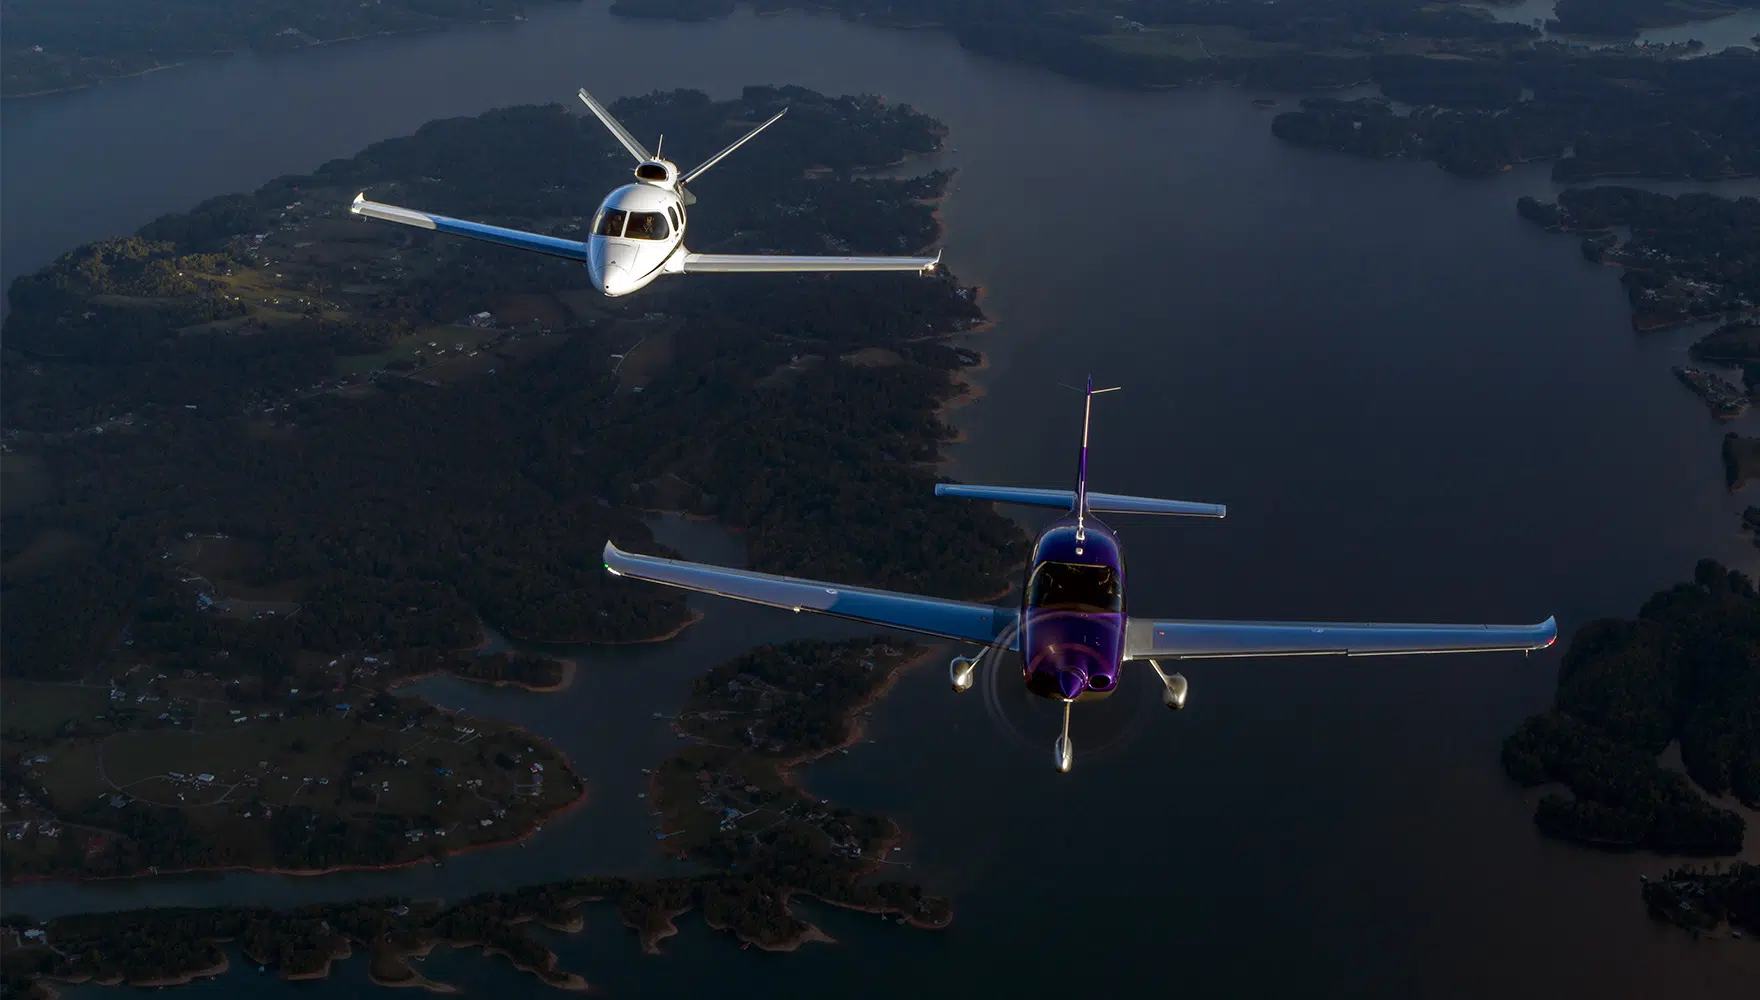 Cirrus Aircraft Expands Services Offerings and adds new Cirrus IQ features to Enhance the Ownership Experience